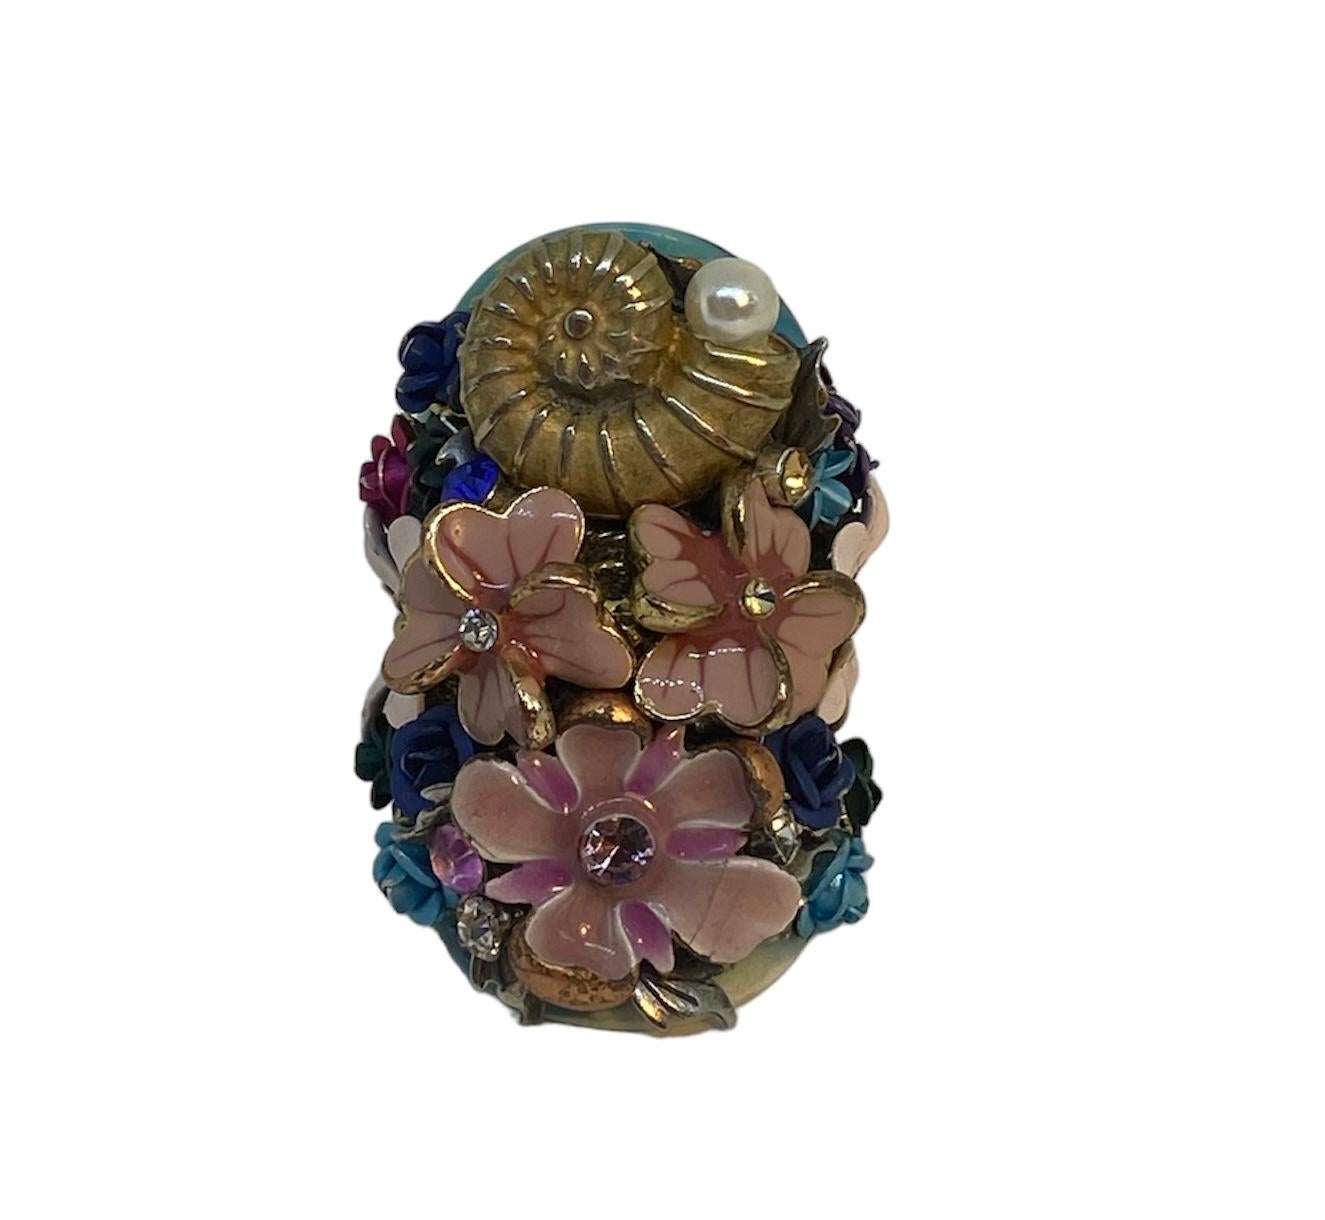 Artisan One Off Ring. Handmade & High Upcycling. Bronze, Resin & Vintage Elements. 20mm. For Sale